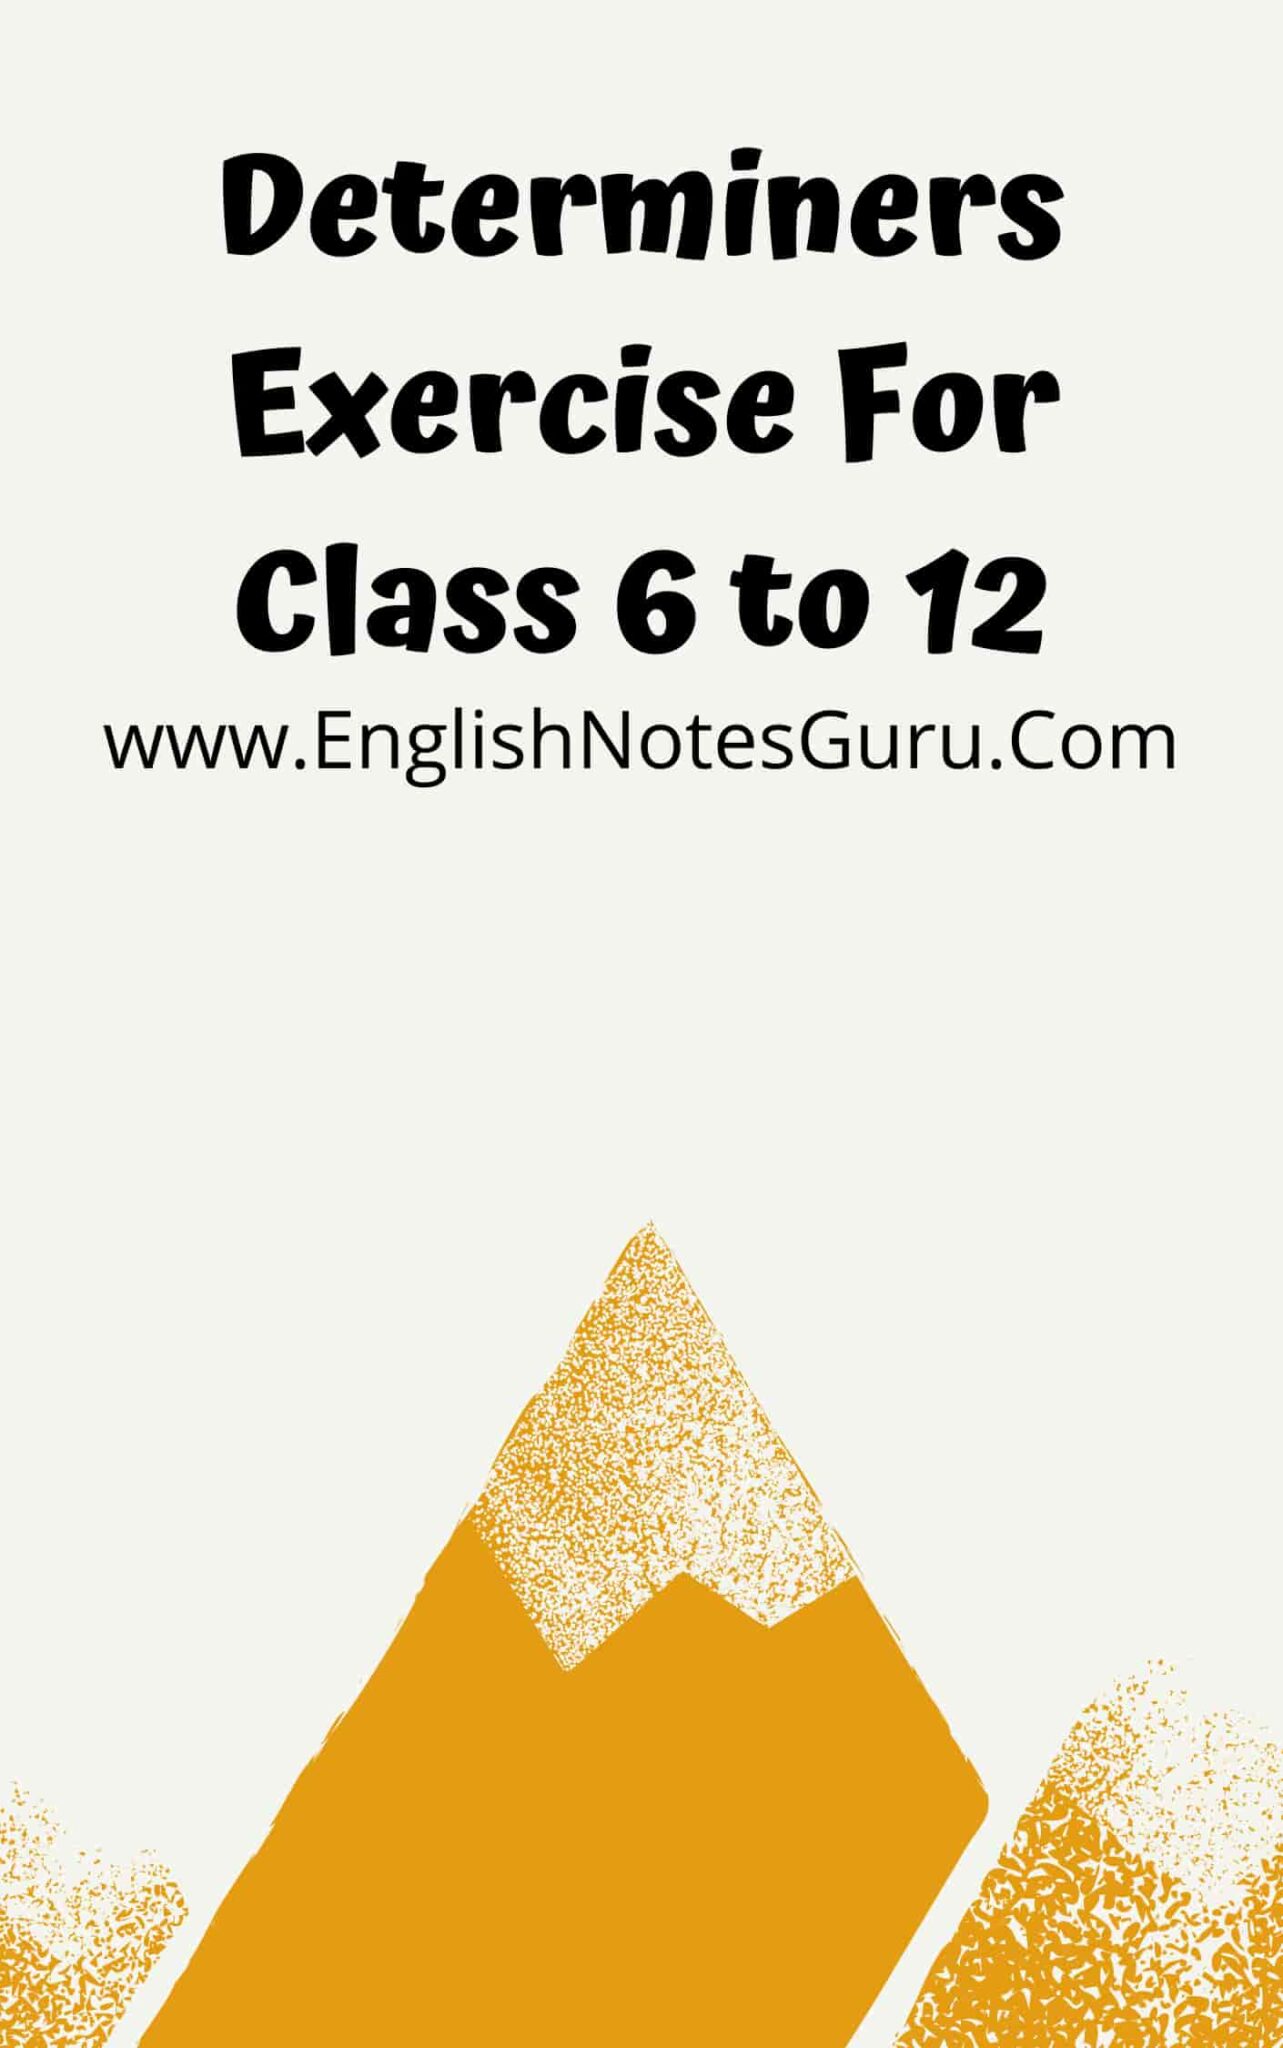 determiners-exercise-for-class-6-to-12-english-notes-guru